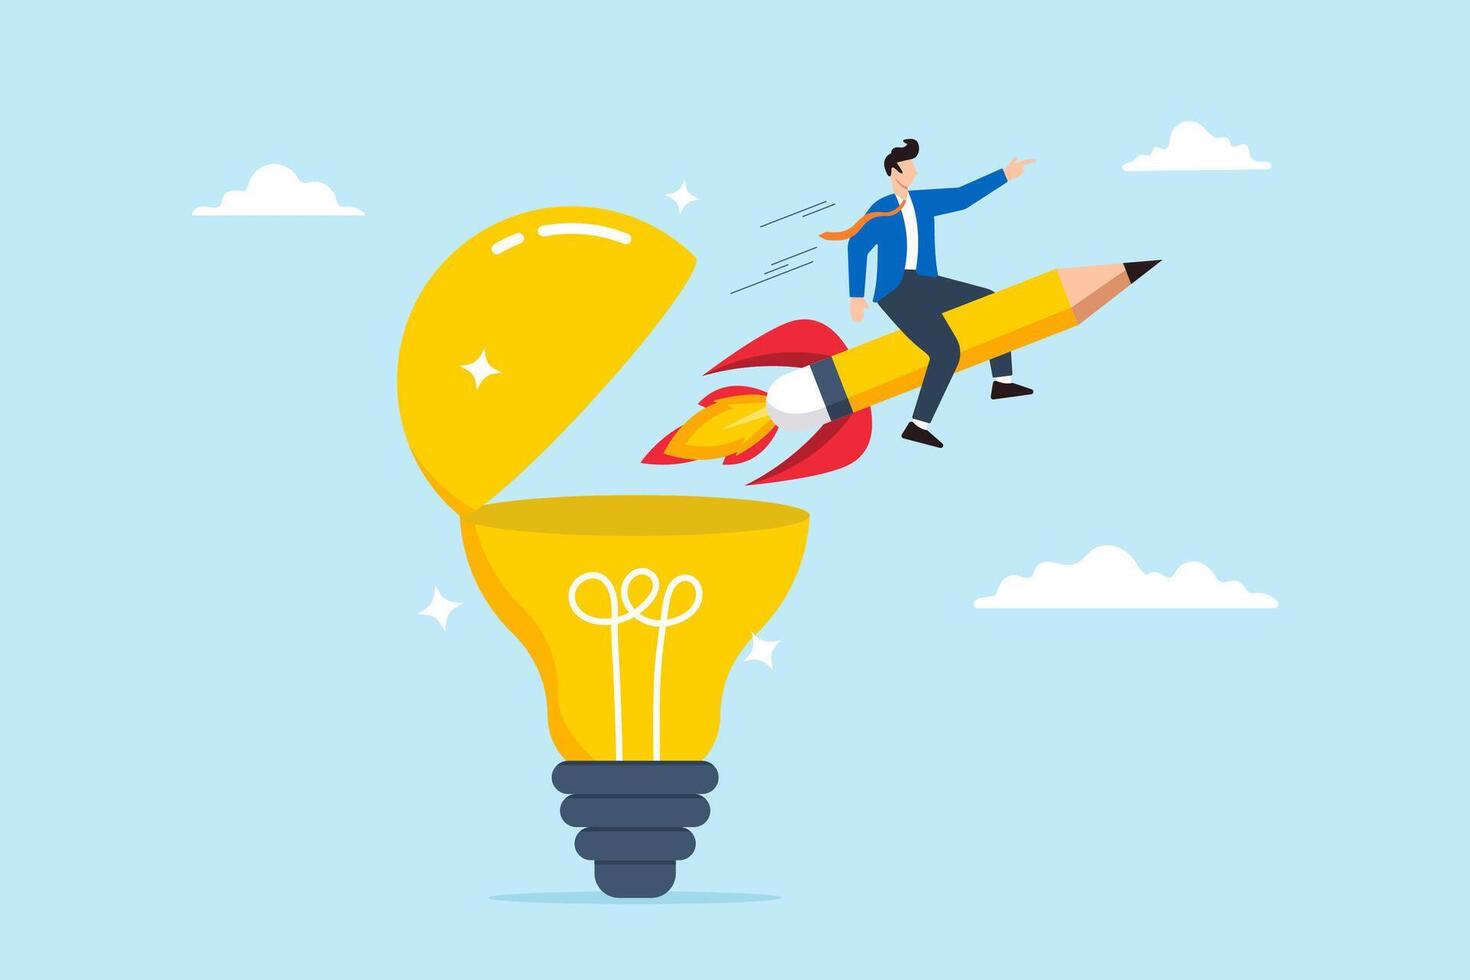 Man rides pencil rocket from open light bulb, illustrating creativity for generating new ideas. Concept of imagination, inspiration, education, and boosting creative thinking to writing content vector